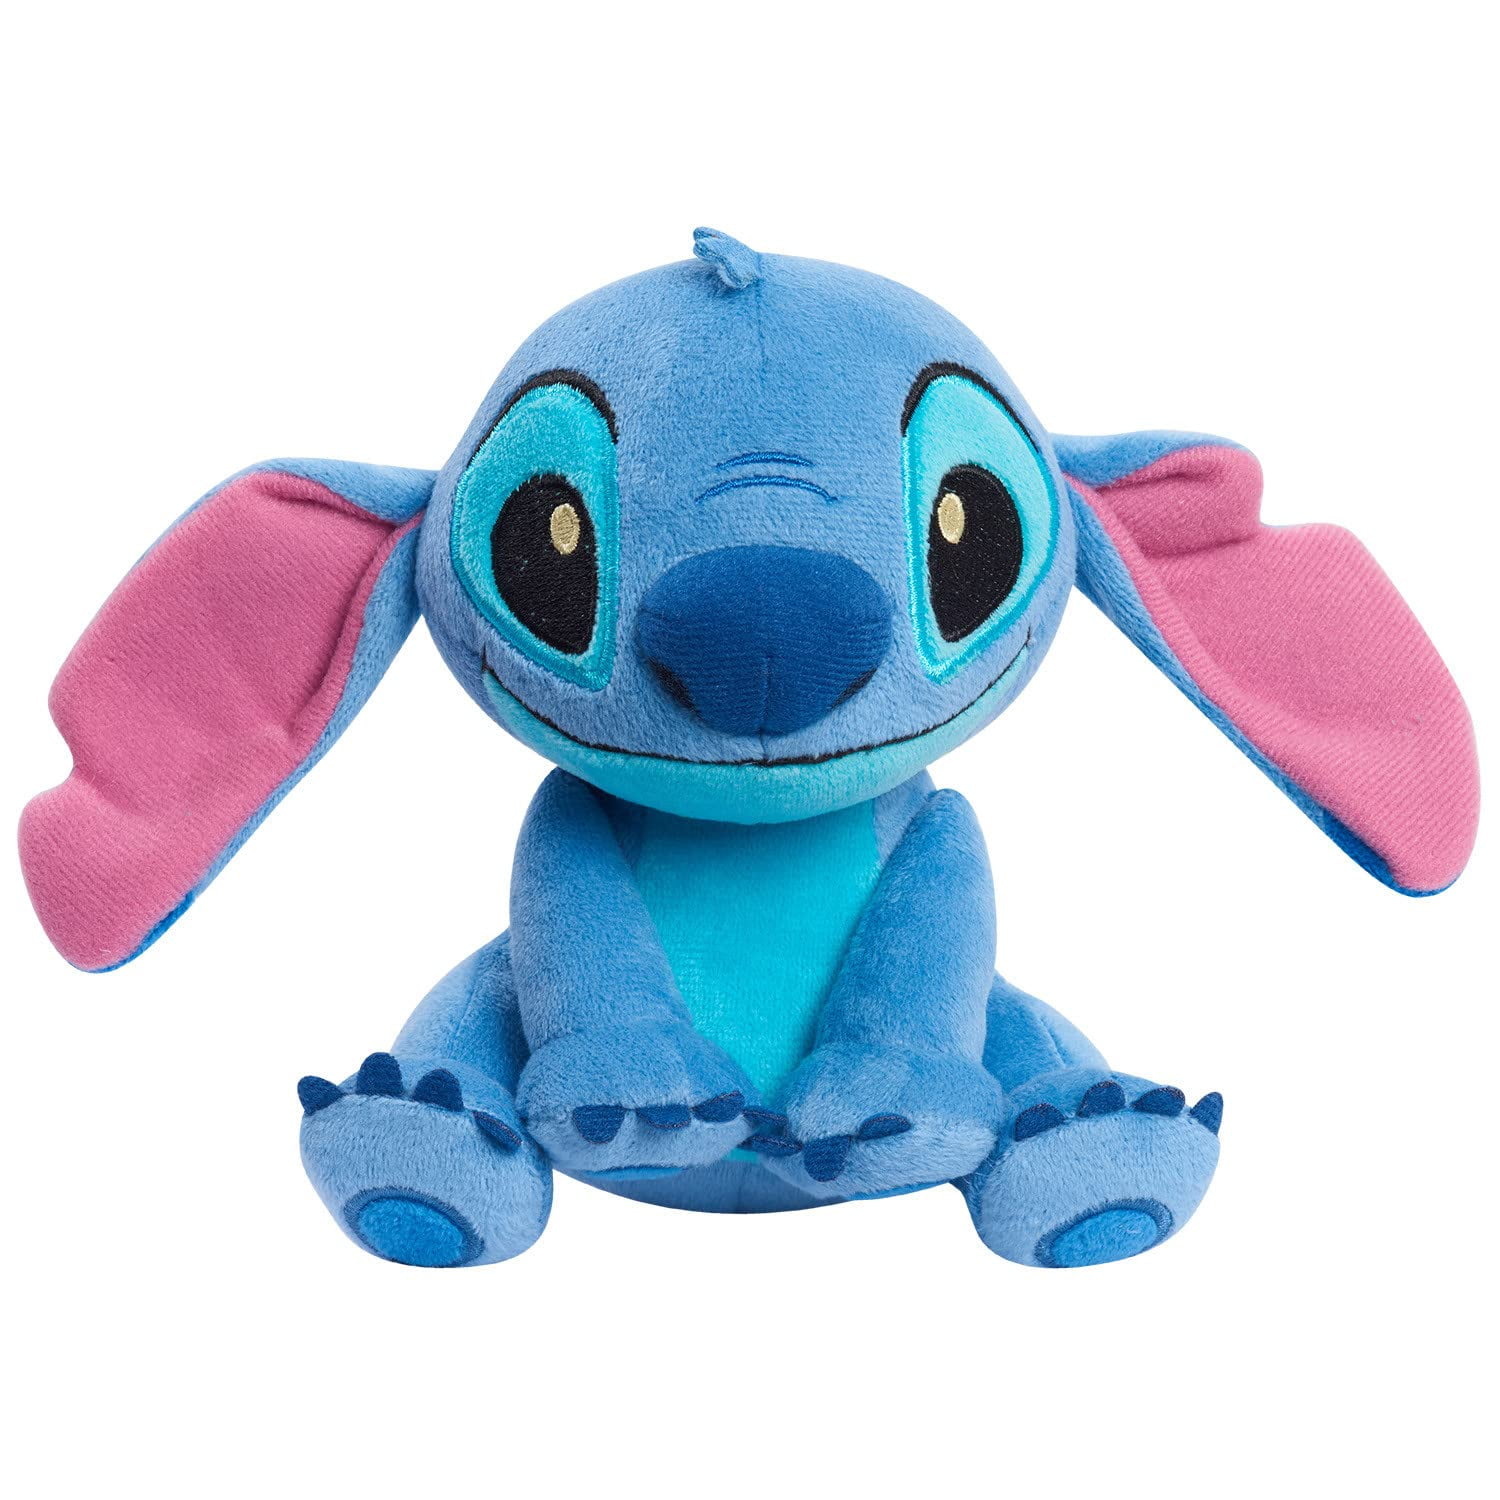 Lilo & Stitch 10cm Beanbag Plushie, Floppy Ears Stitch, Officially Licensed  Kids Toys for Ages 2 Up, Gifts and Presents by Just Play 